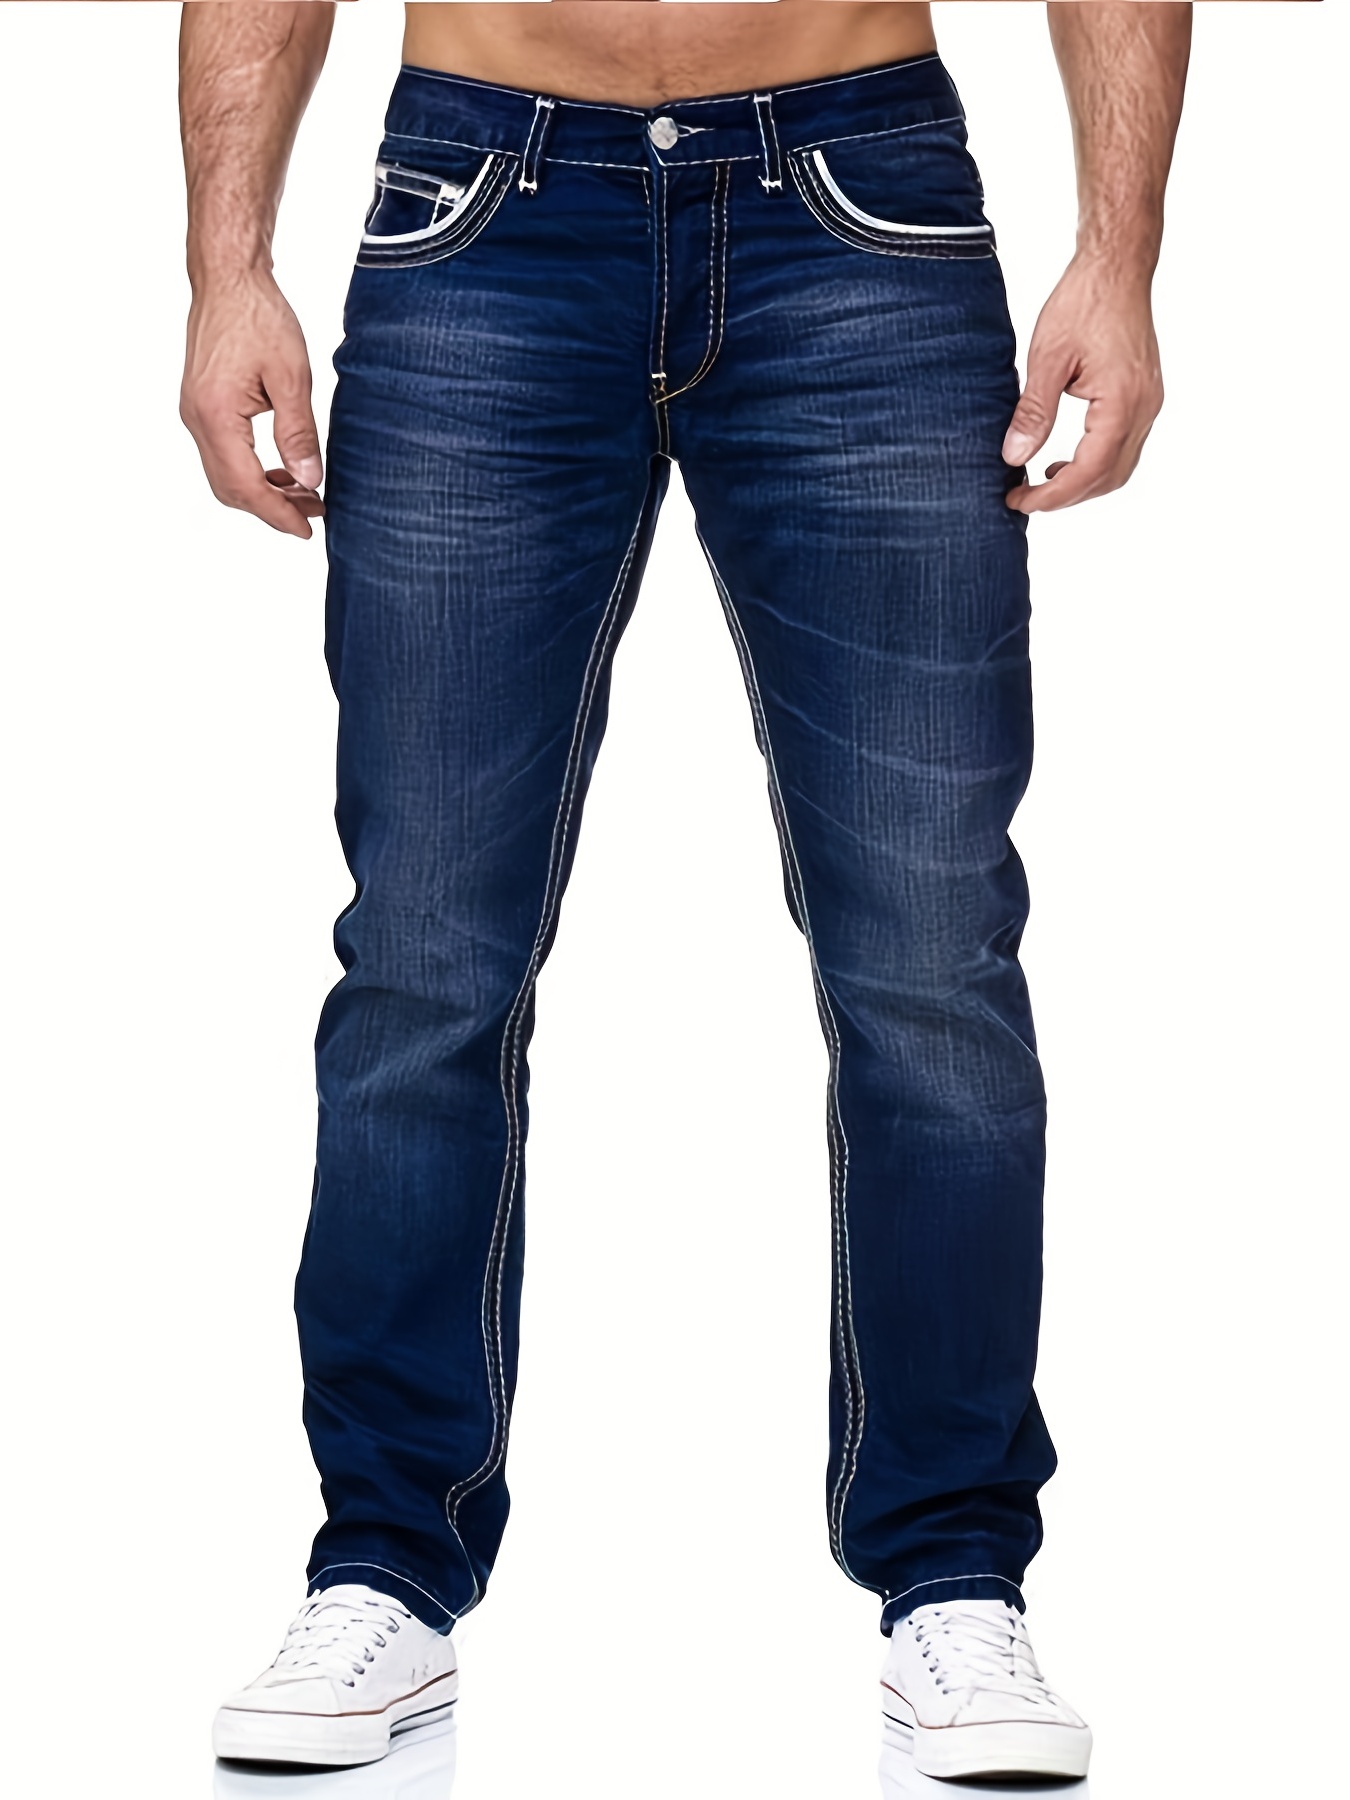 Men's Loose Fit Tapered Jeans, Men's Casual Street Style Ripped Denim Pants